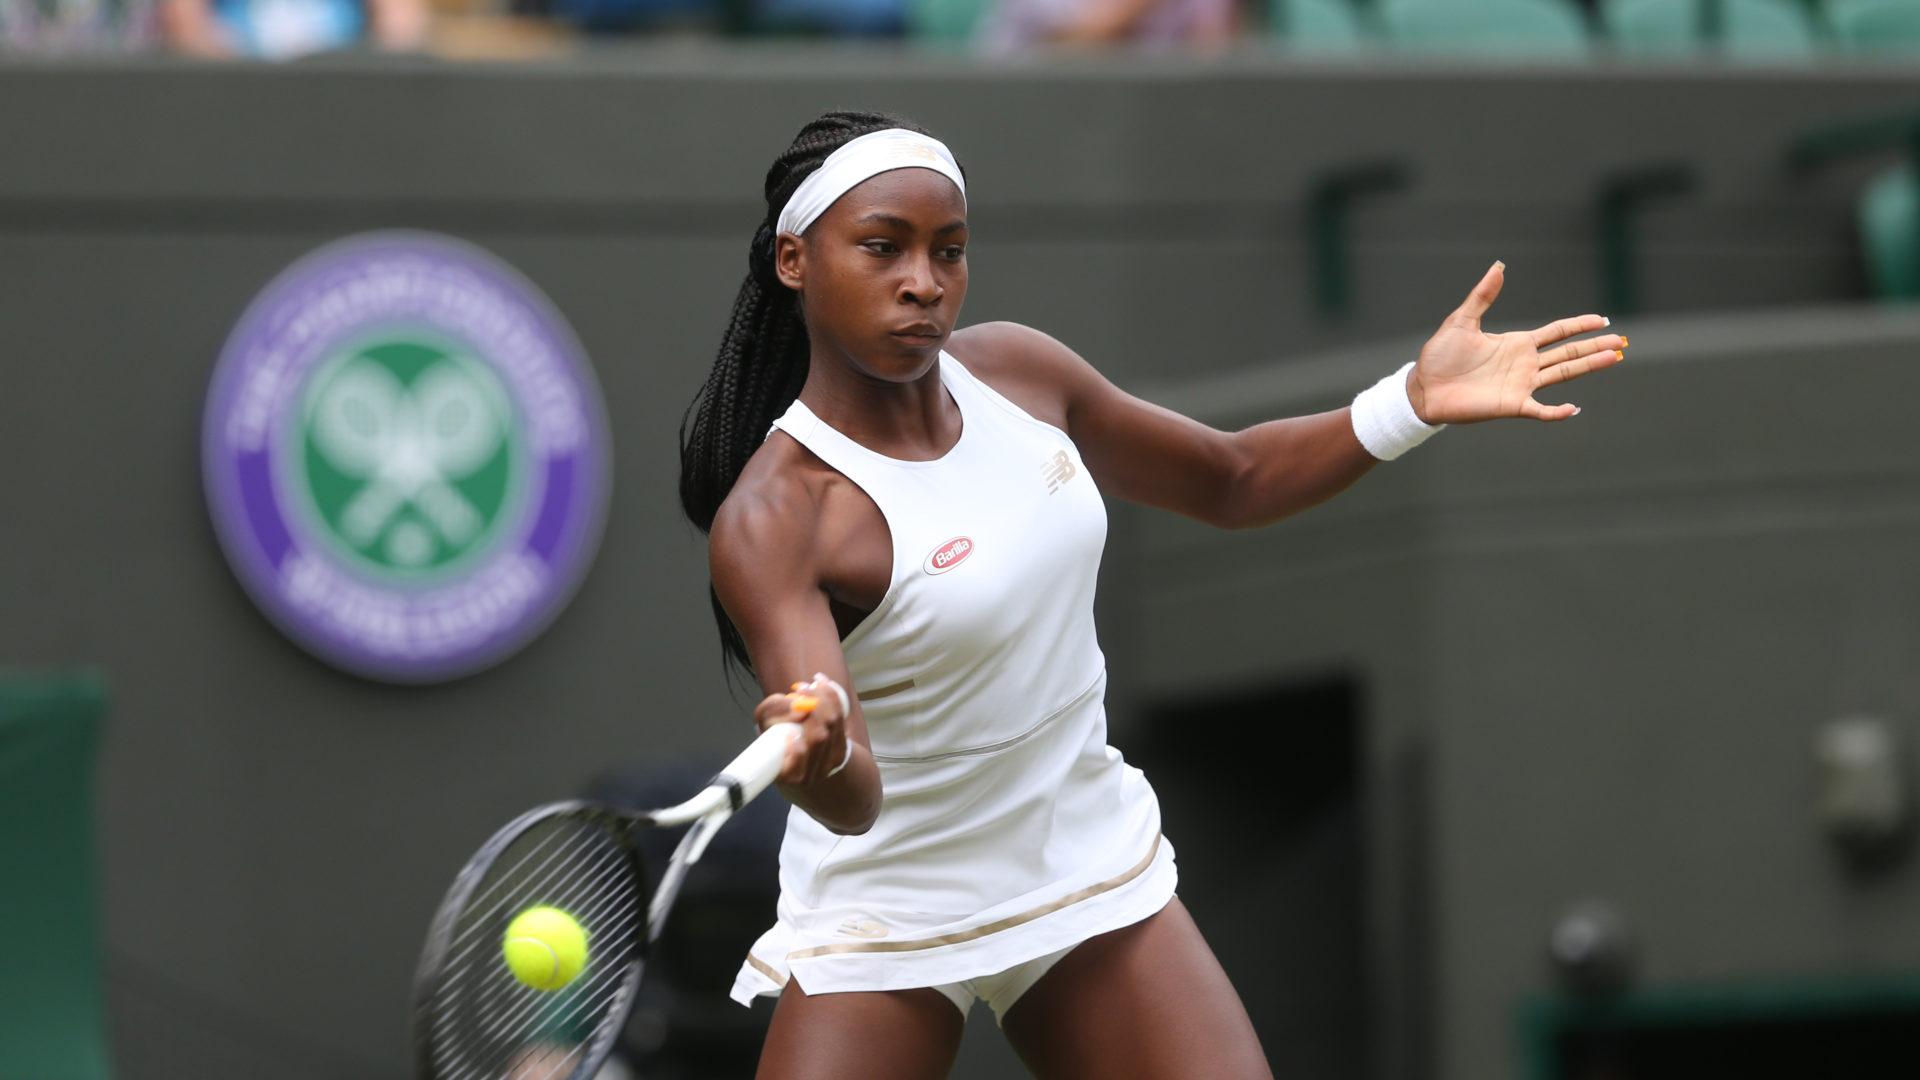 Cori Gauff, The Youngest Player To Qualify For Wimbledon, Defeats